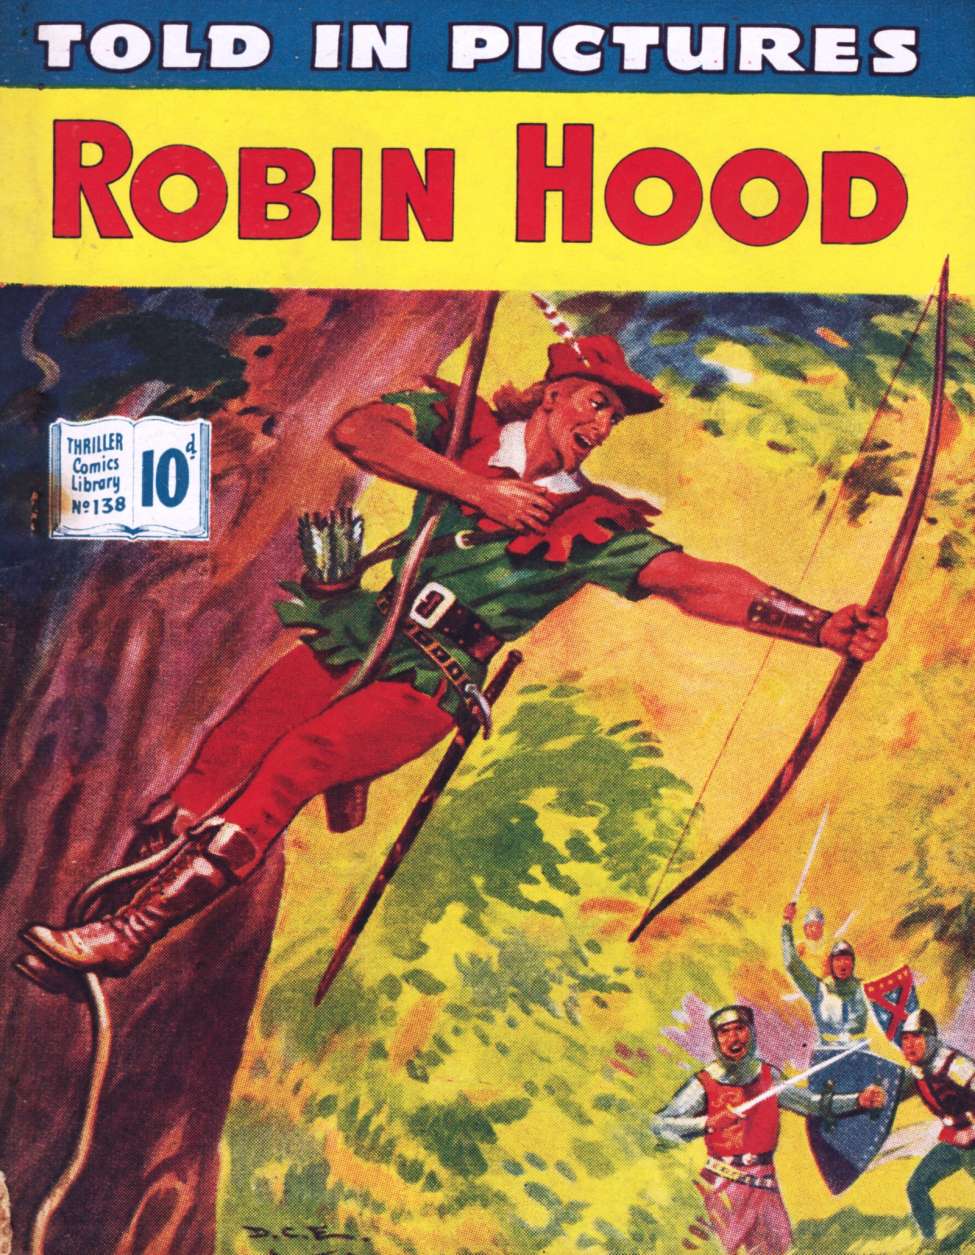 Book Cover For Thriller Comics Library 138 - Robin Hood